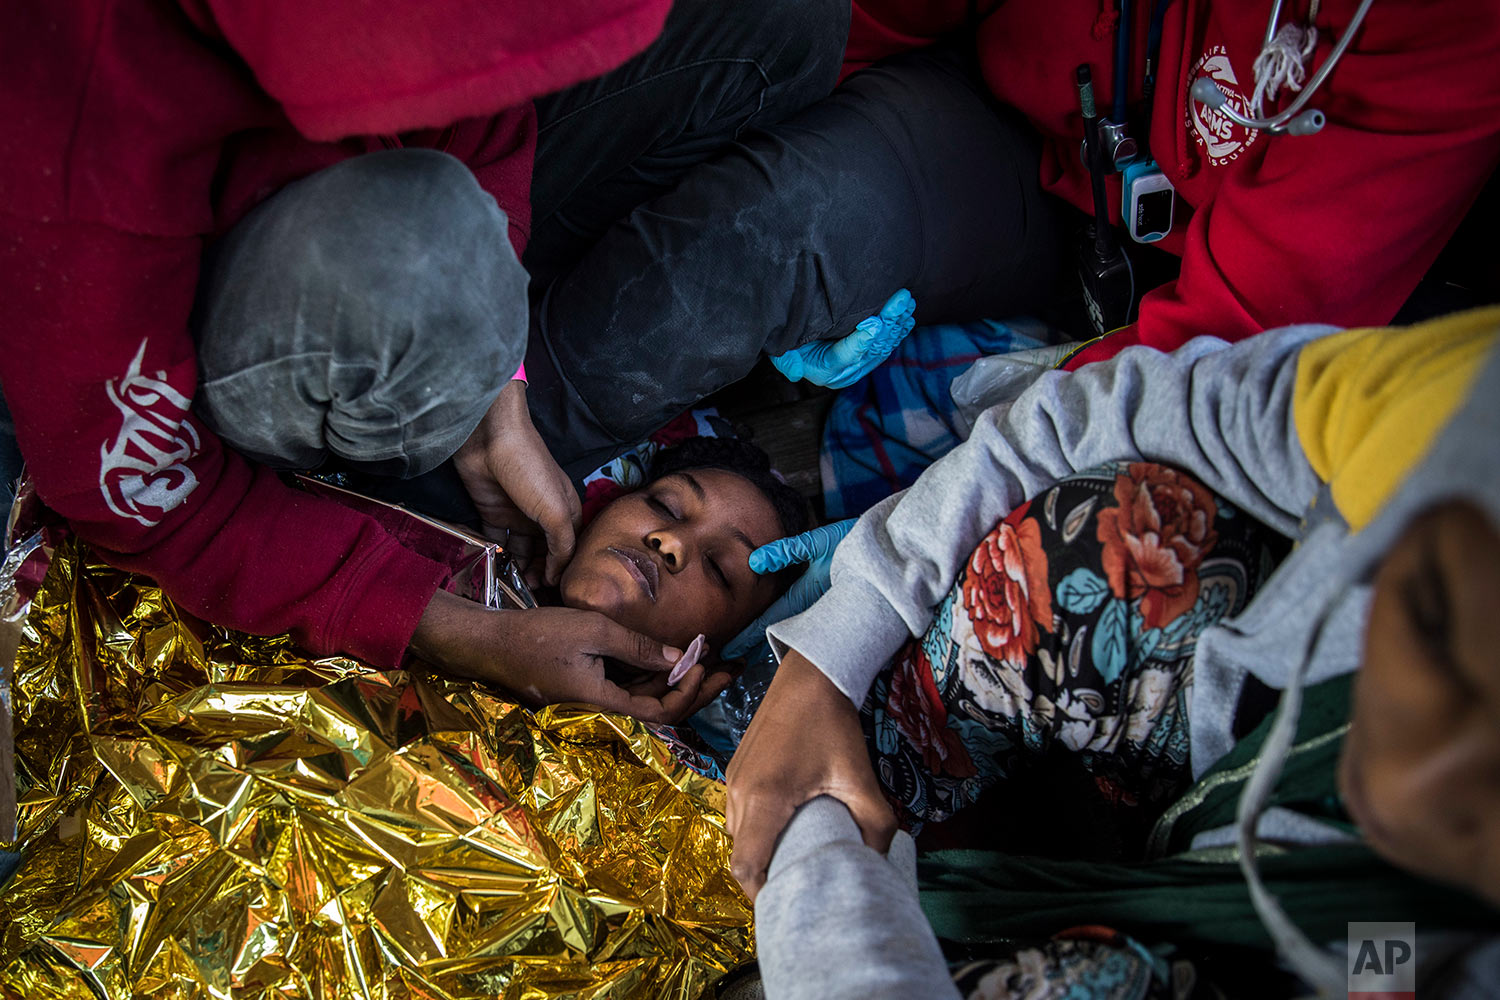  In this Thursday, Jan. 18, 2018 photo a doctor from the Spanish NGO Proactiva Open Arms assists an Eritrean woman as the organization's rescue vessel heads to Italy with more than 300 refugees and migrants on board. (AP Photo/Santi Palacios)&nbsp; |&nbsp; See these photos on AP Images  